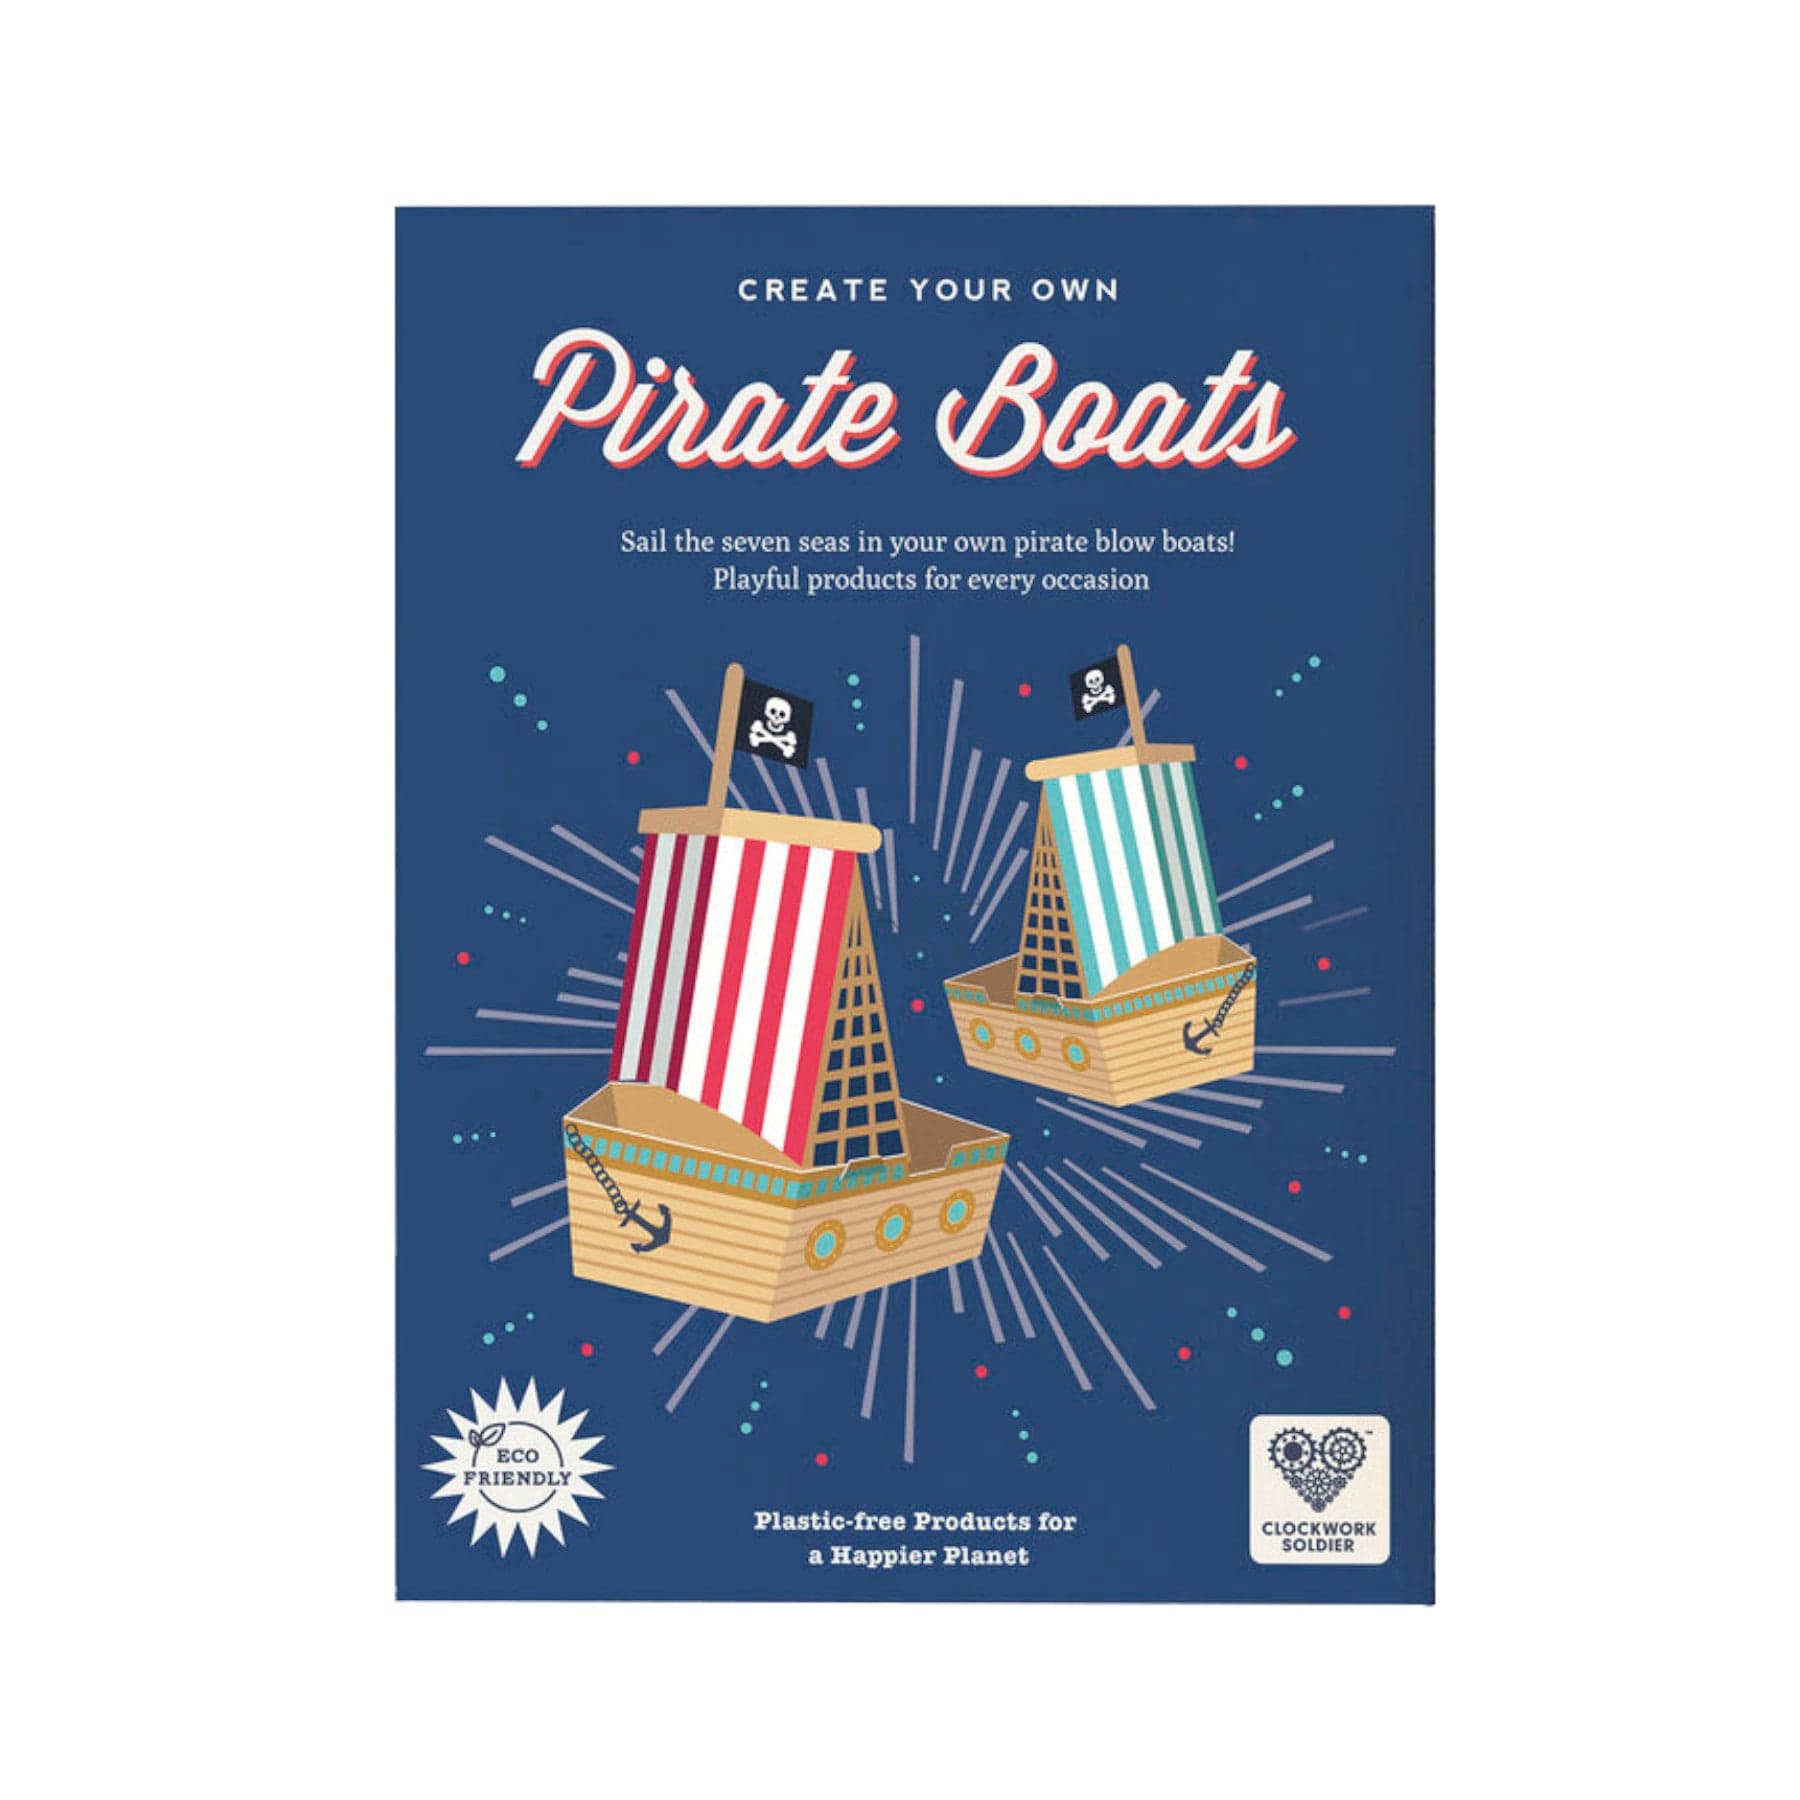 Illustration of create your own pirate boats, eco-friendly toy, sustainable children's playset, plastic-free products, Clockwork Soldier branding, playful occasion gifts, cardboard craft kit advertisement with two colorful striped sailboats and pirate flags.